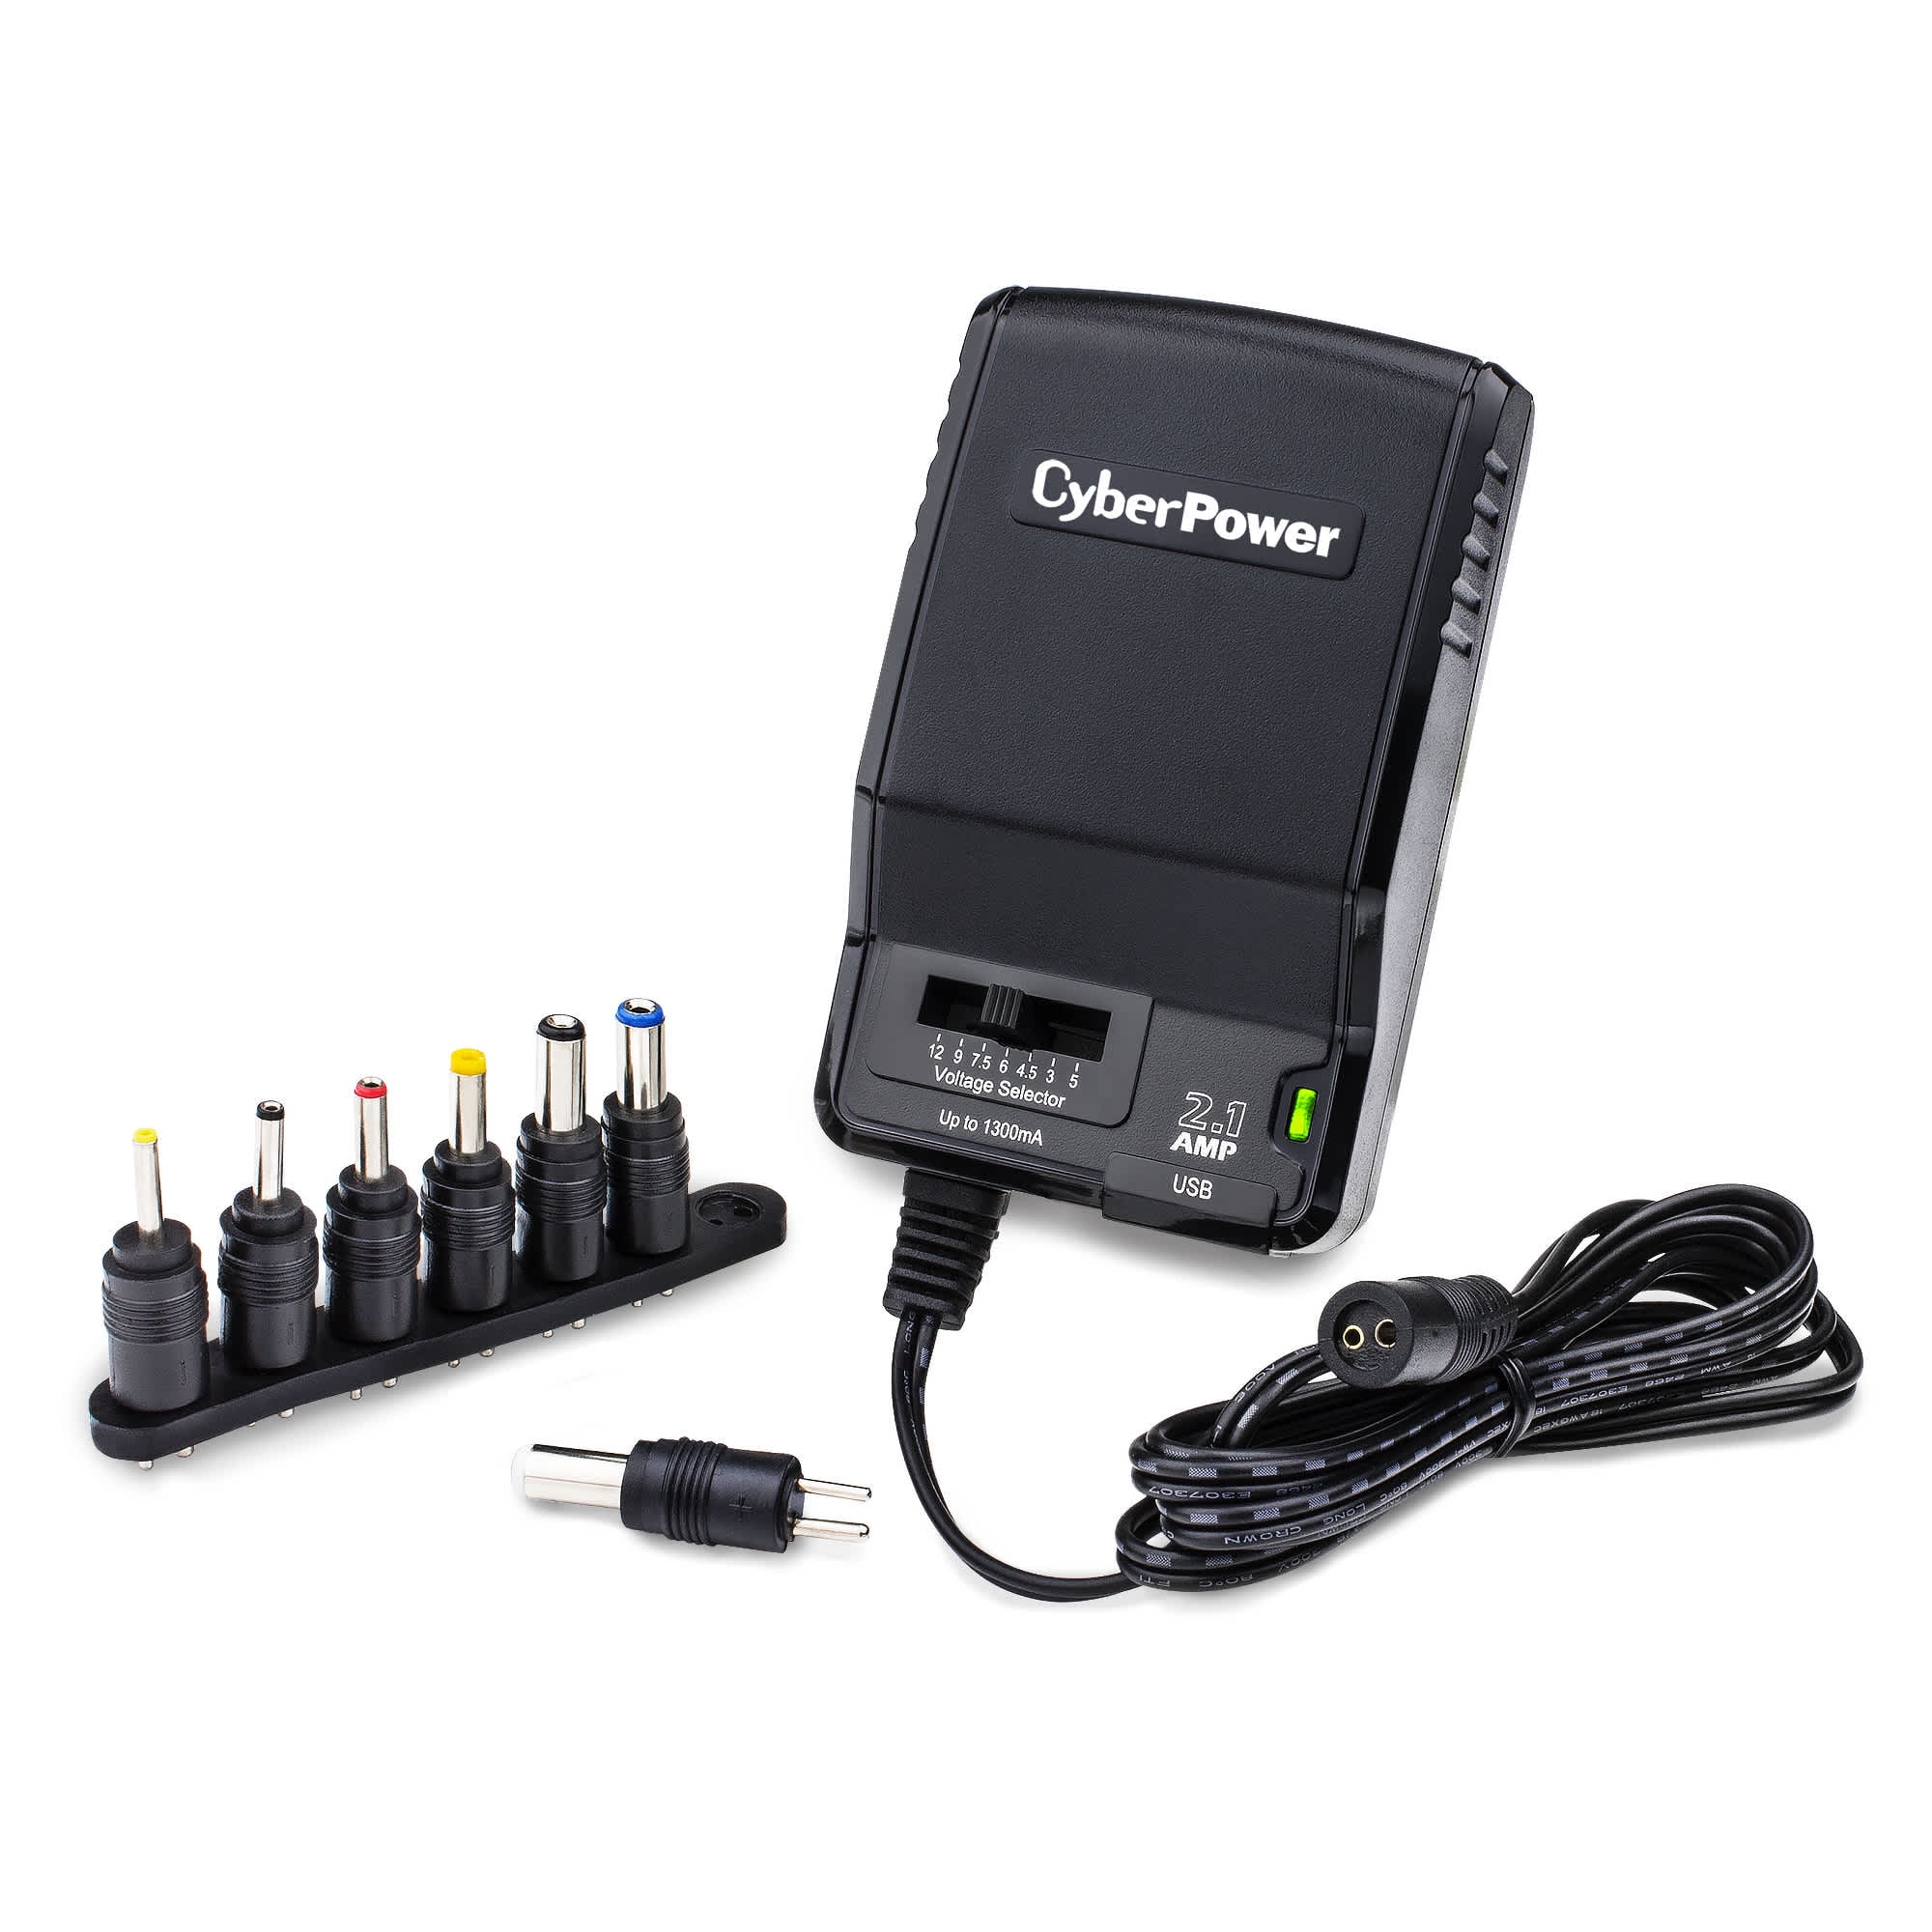 CyberPower CPUAC1U1300 Universal Power Adapter 3 -12 Volt / 1300mA with  Folding AC Plug and 2.1 Amp USB Charge Port 